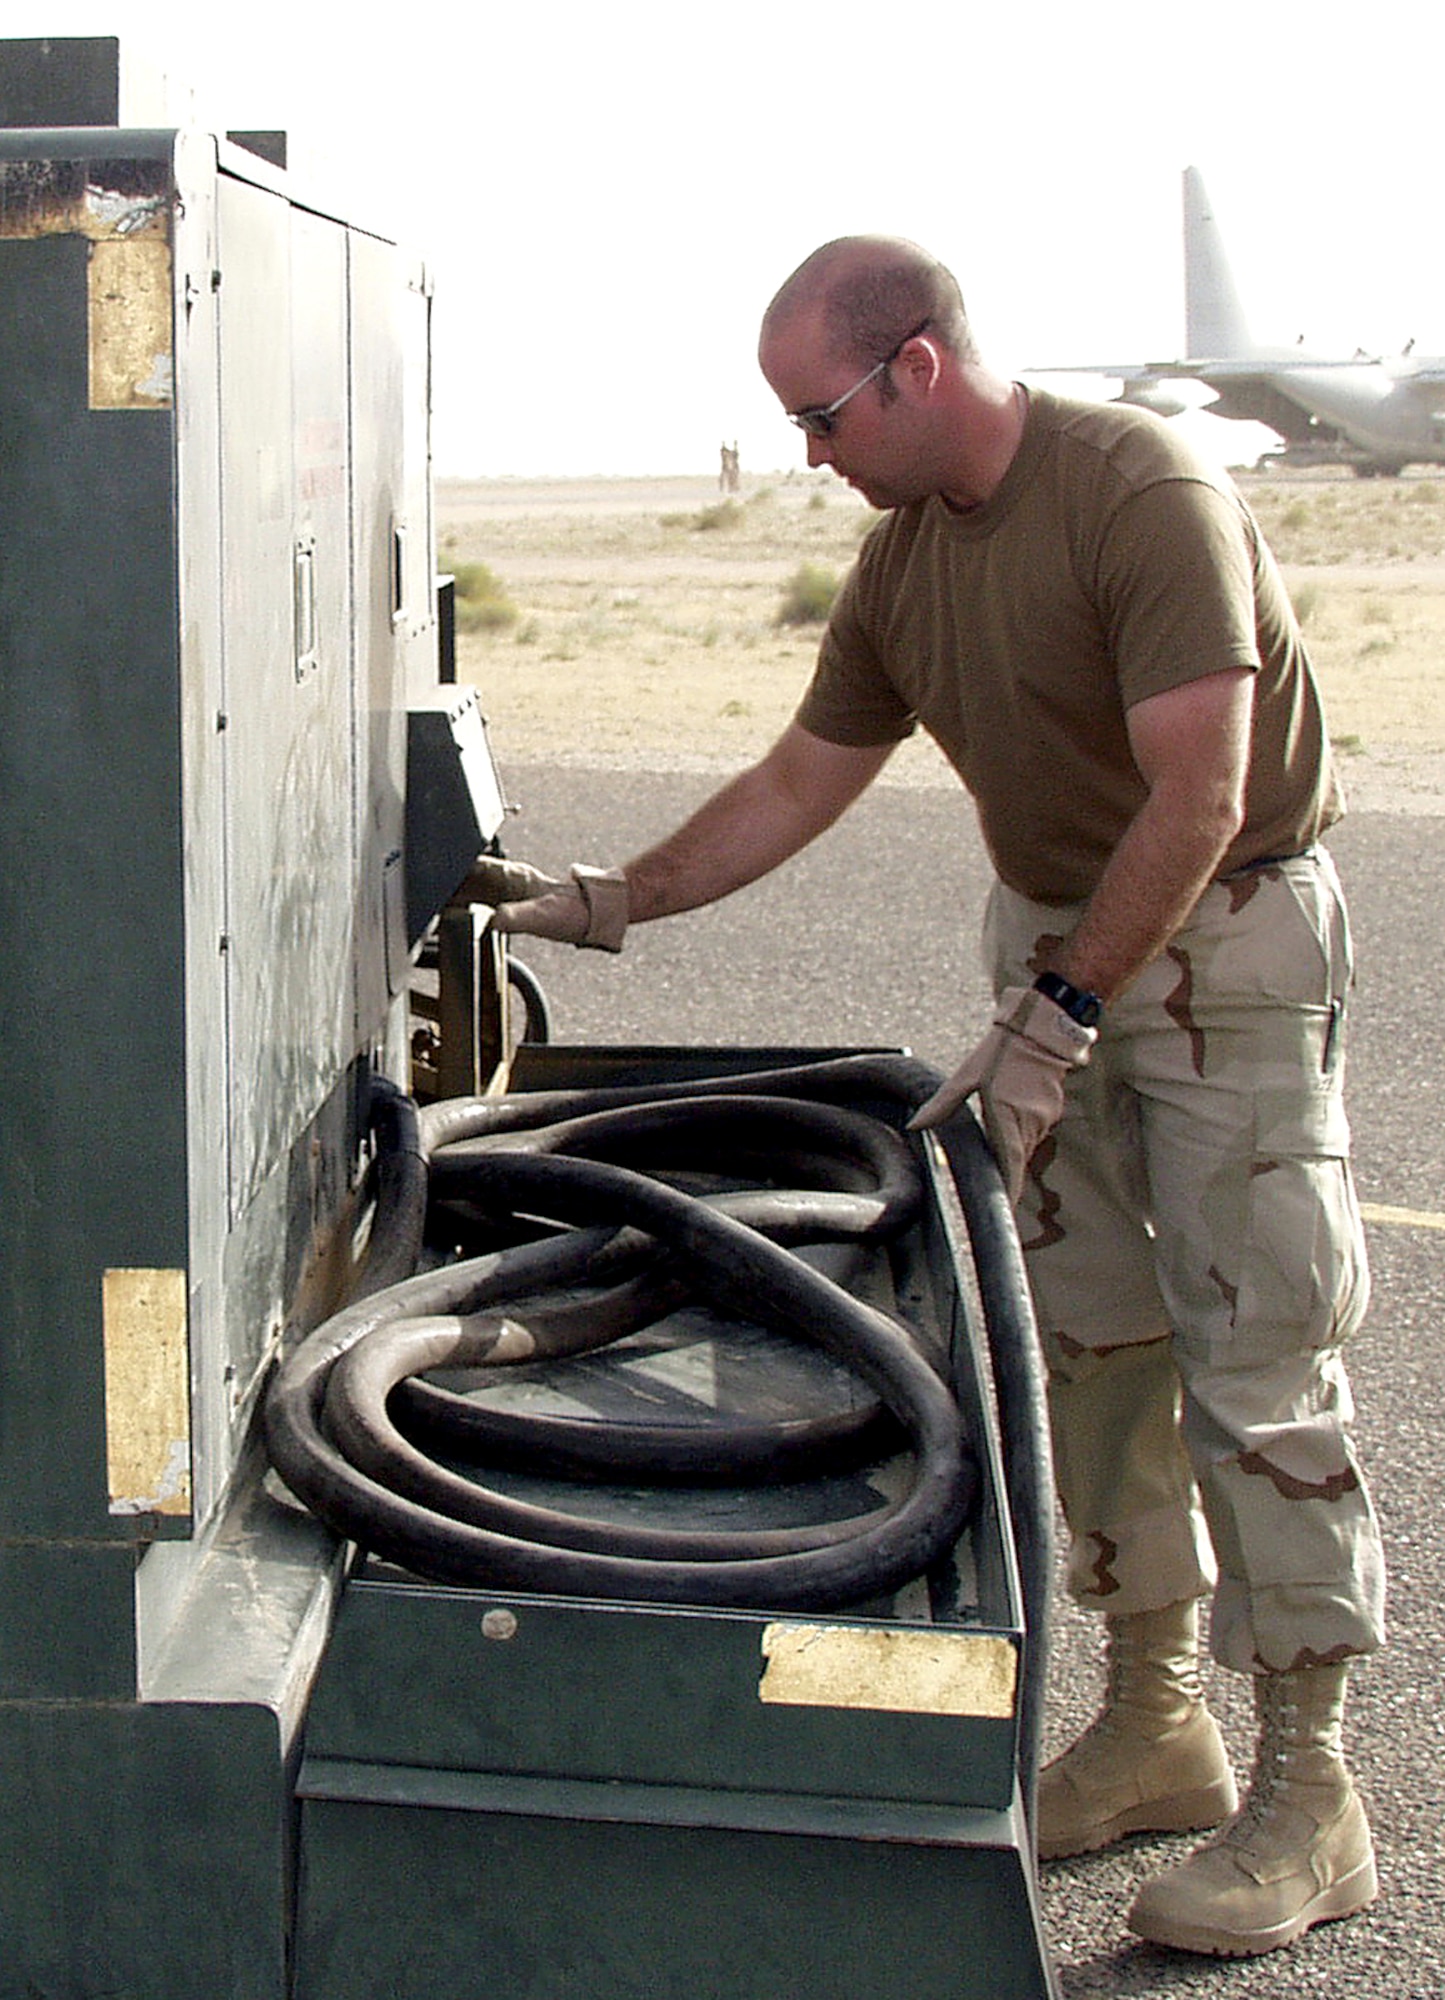 OPERATION IRAQI FREEDOM -- Staff Sgt. Robert Rawlings, a heavy aircraft crew chief with the 386th Air Expeditionary Wing's transient alert team, shuts down an external power unit for a C-130 Hercules heading to Iraq. The transient alert team ensures transient aircraft are properly parked, provides power to aircraft, assists in moving cargo pallets and troubleshoots and fixes maintenance problems. (U.S. Air Force photo by Staff Sgt. Karen J. Tomasik)